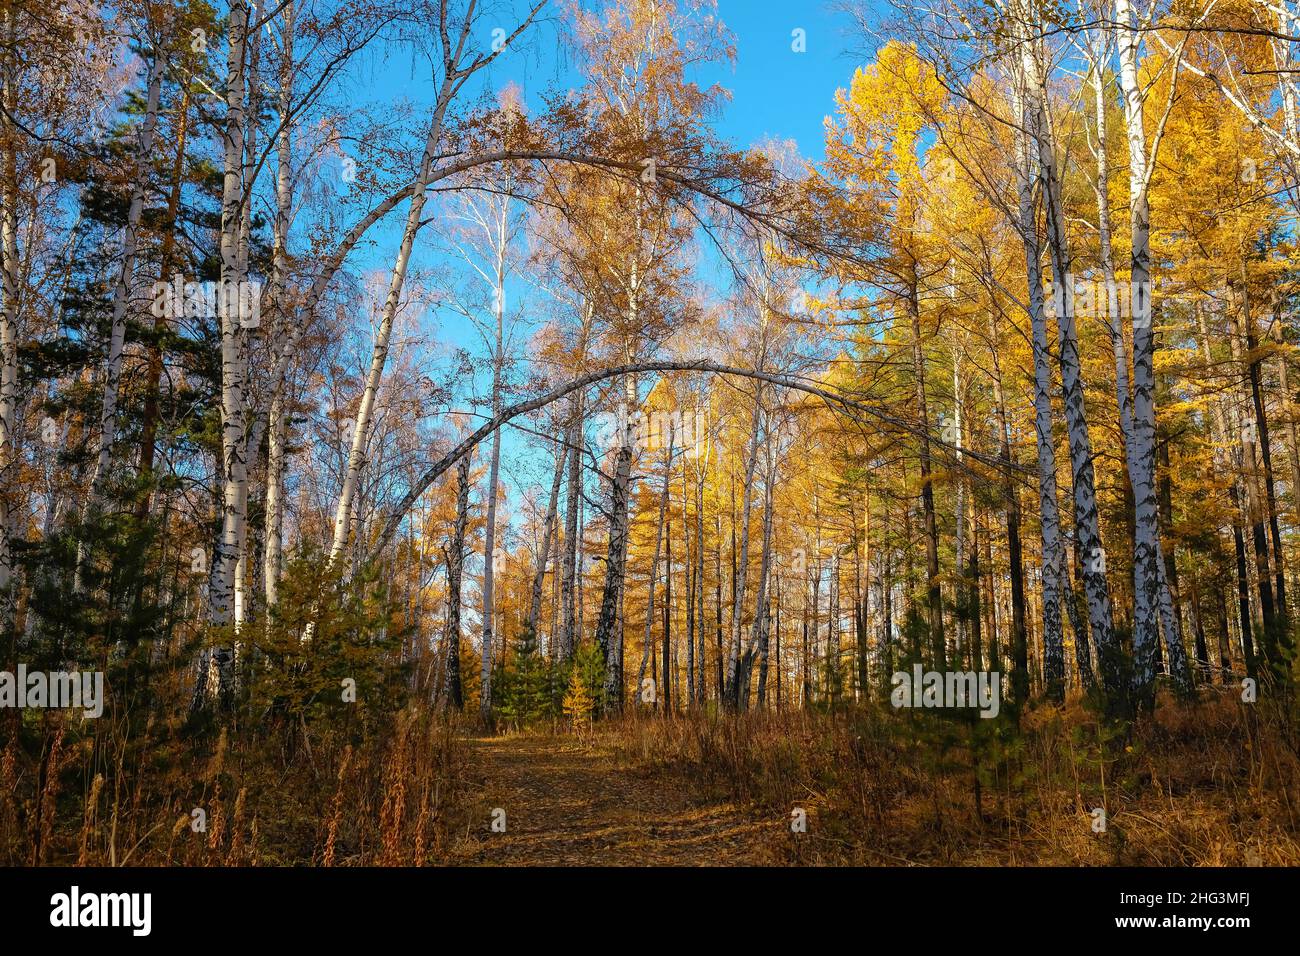 Autumn forest in a mixed forest. Blue sky, blurred background, no people. Stock Photo